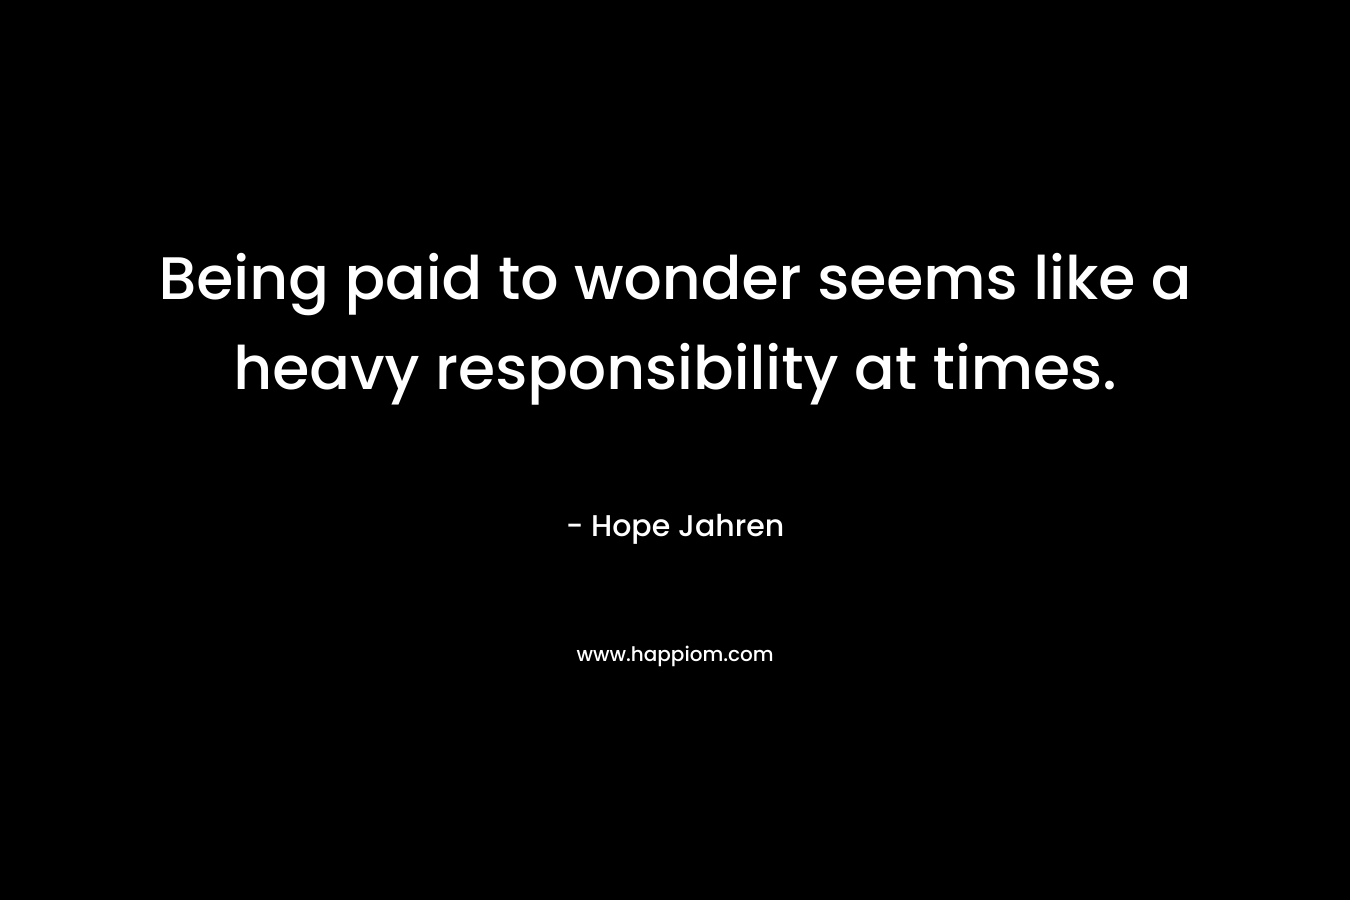 Being paid to wonder seems like a heavy responsibility at times. – Hope Jahren